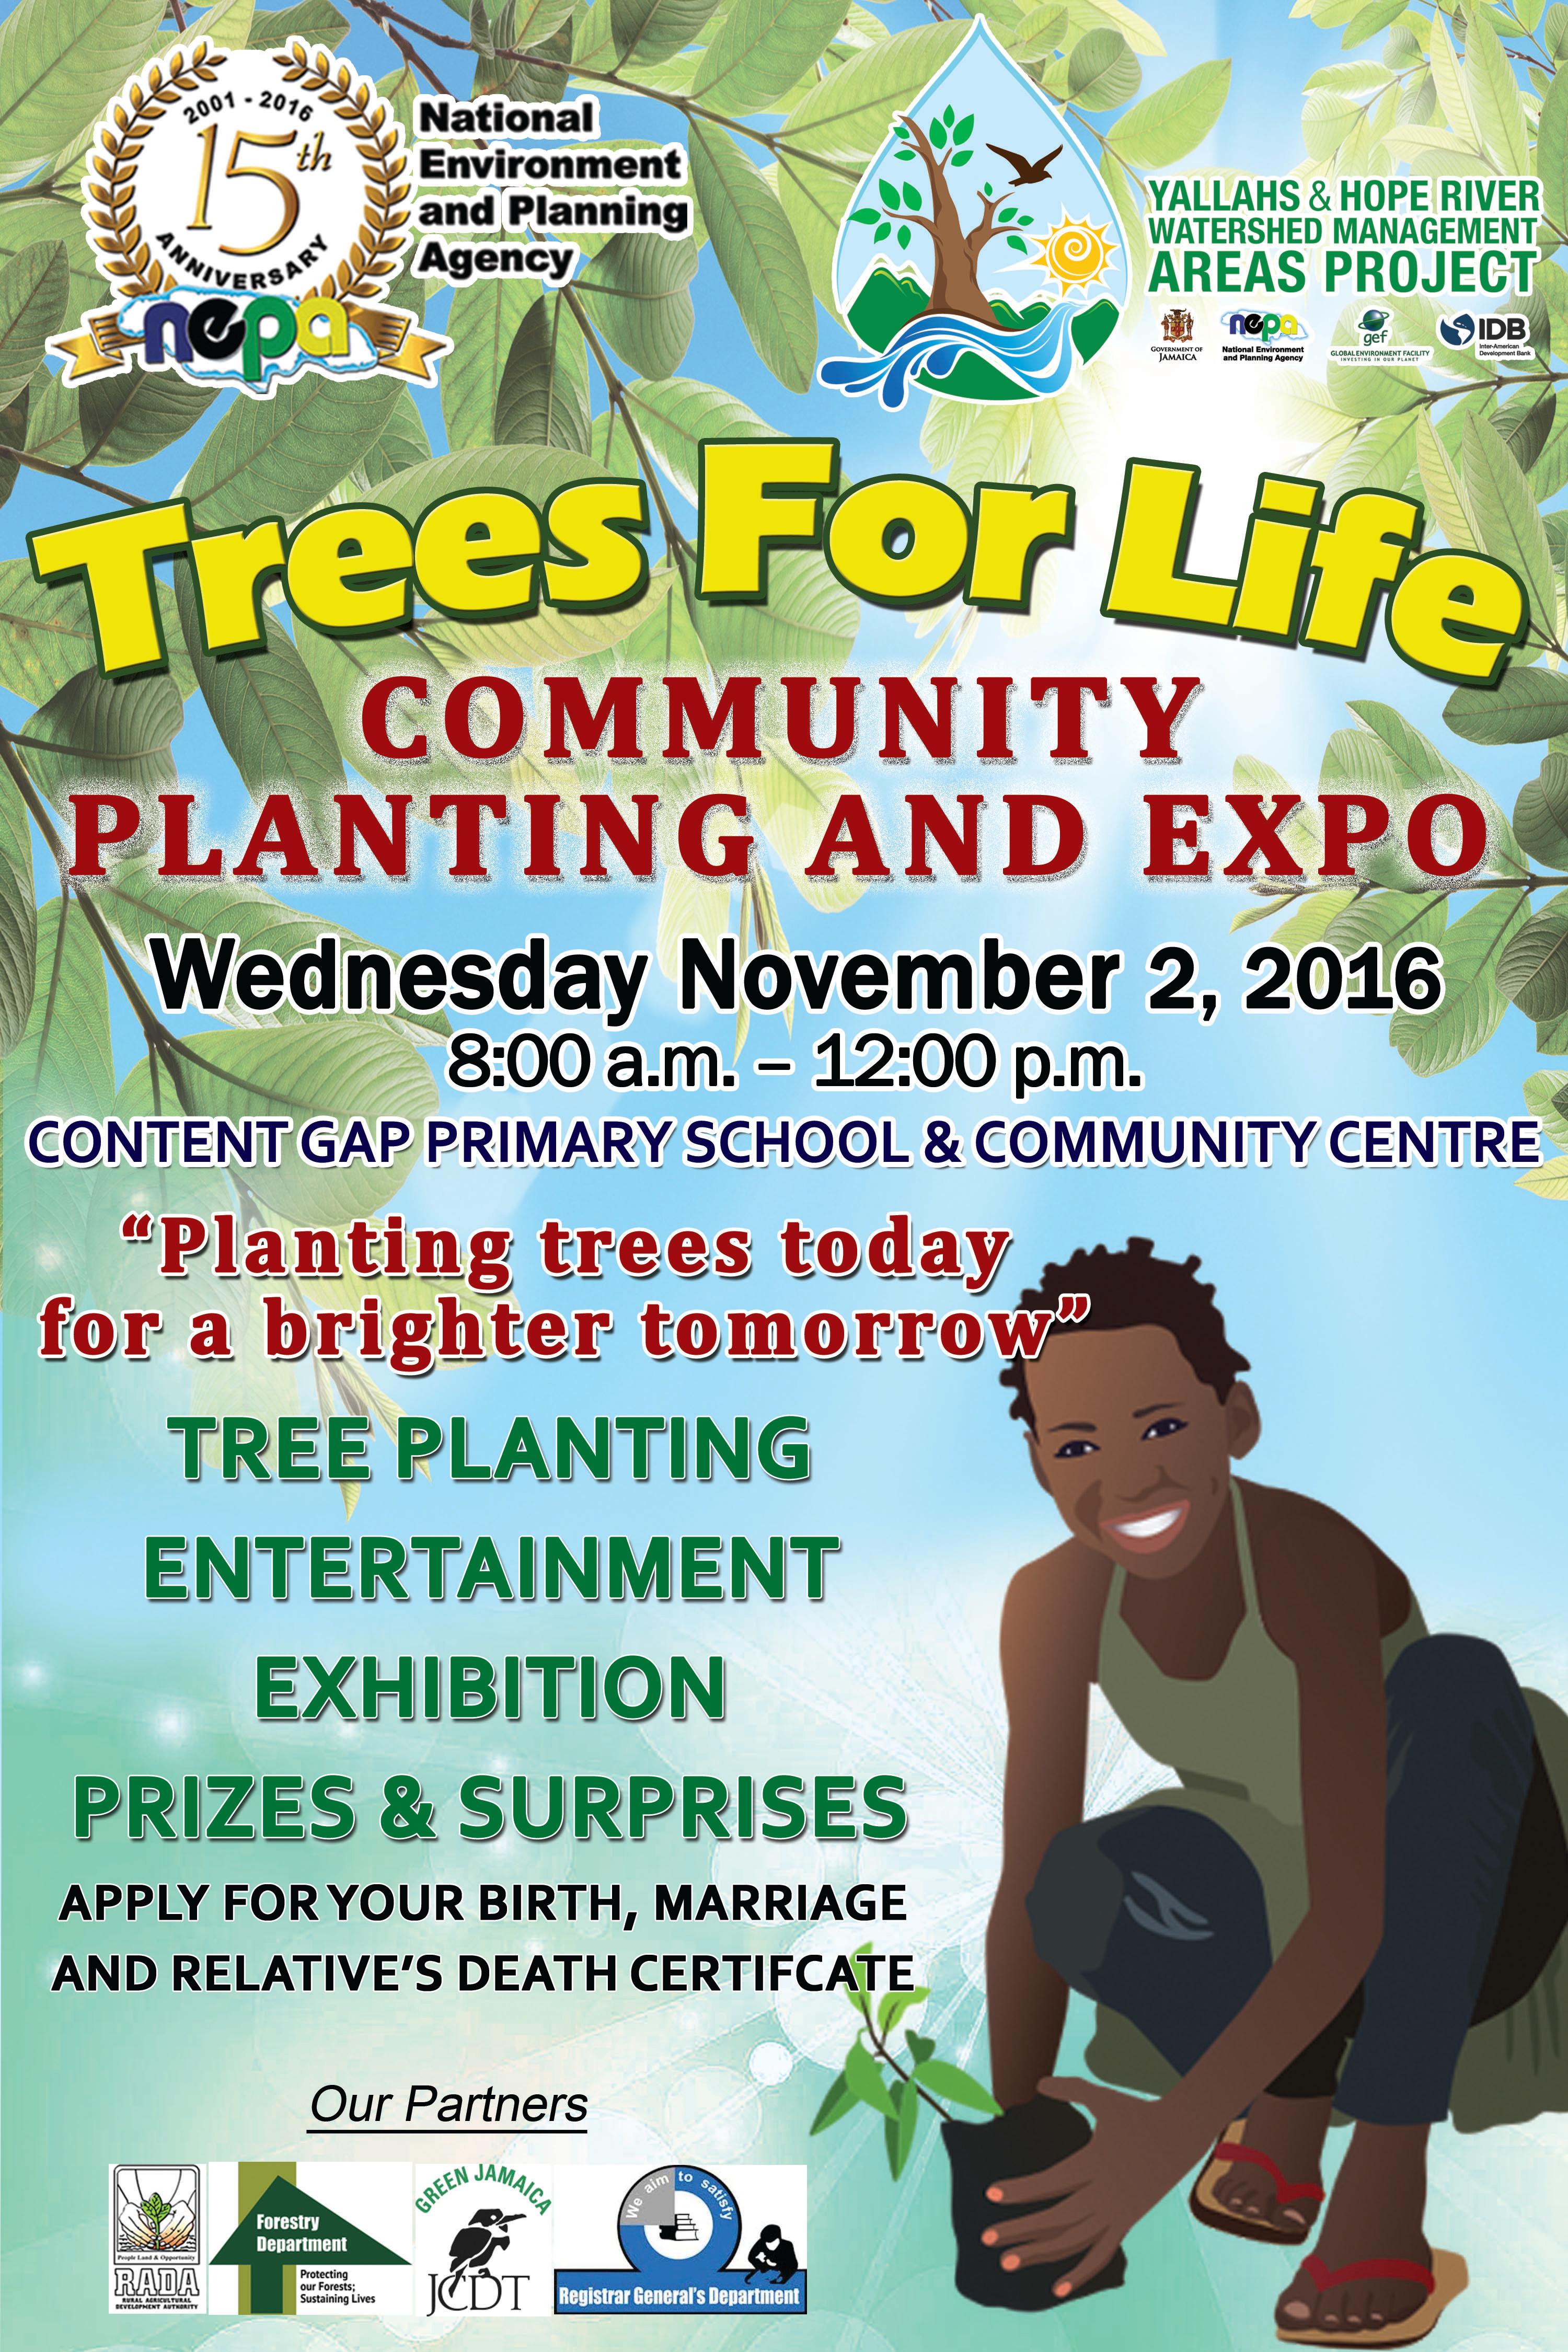 Trees For Life: Community Planting and Expo